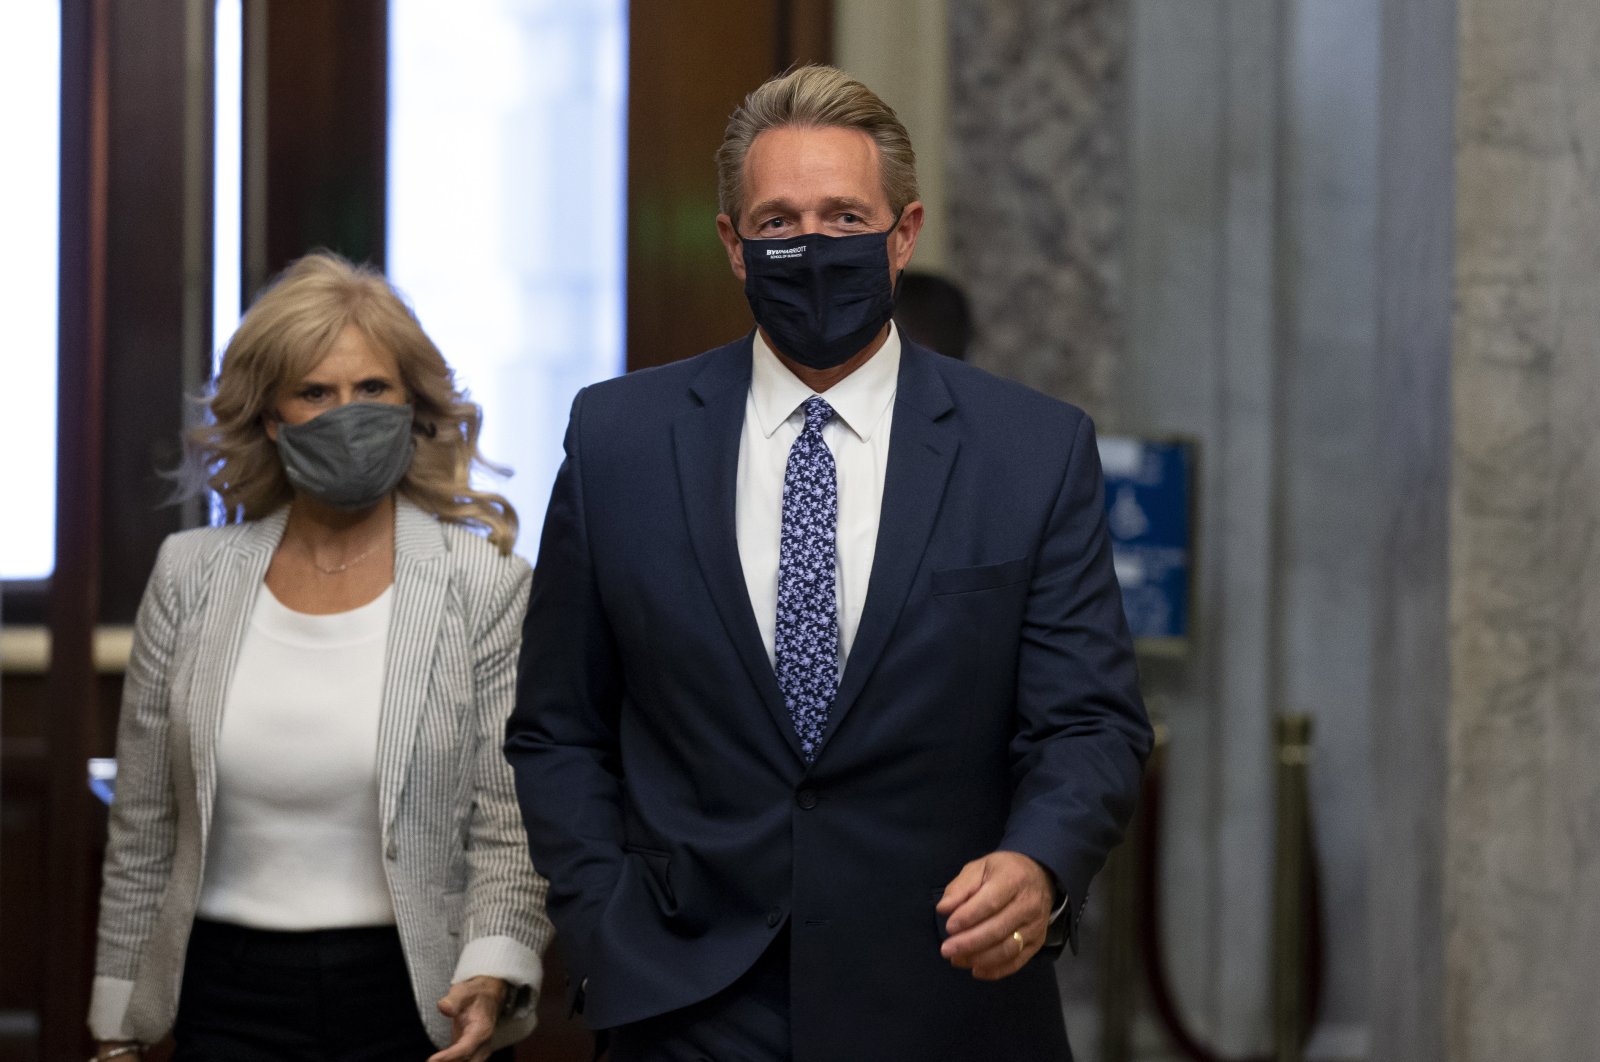 Former Republican Senator from Arizona and nominee for ambassador to Turkey Jeff Flake (R) walks with his wife Cheryl Flake, on Capitol Hill in Washington, D.C., U.S., Oct. 19, 2021. (EPA Photo)